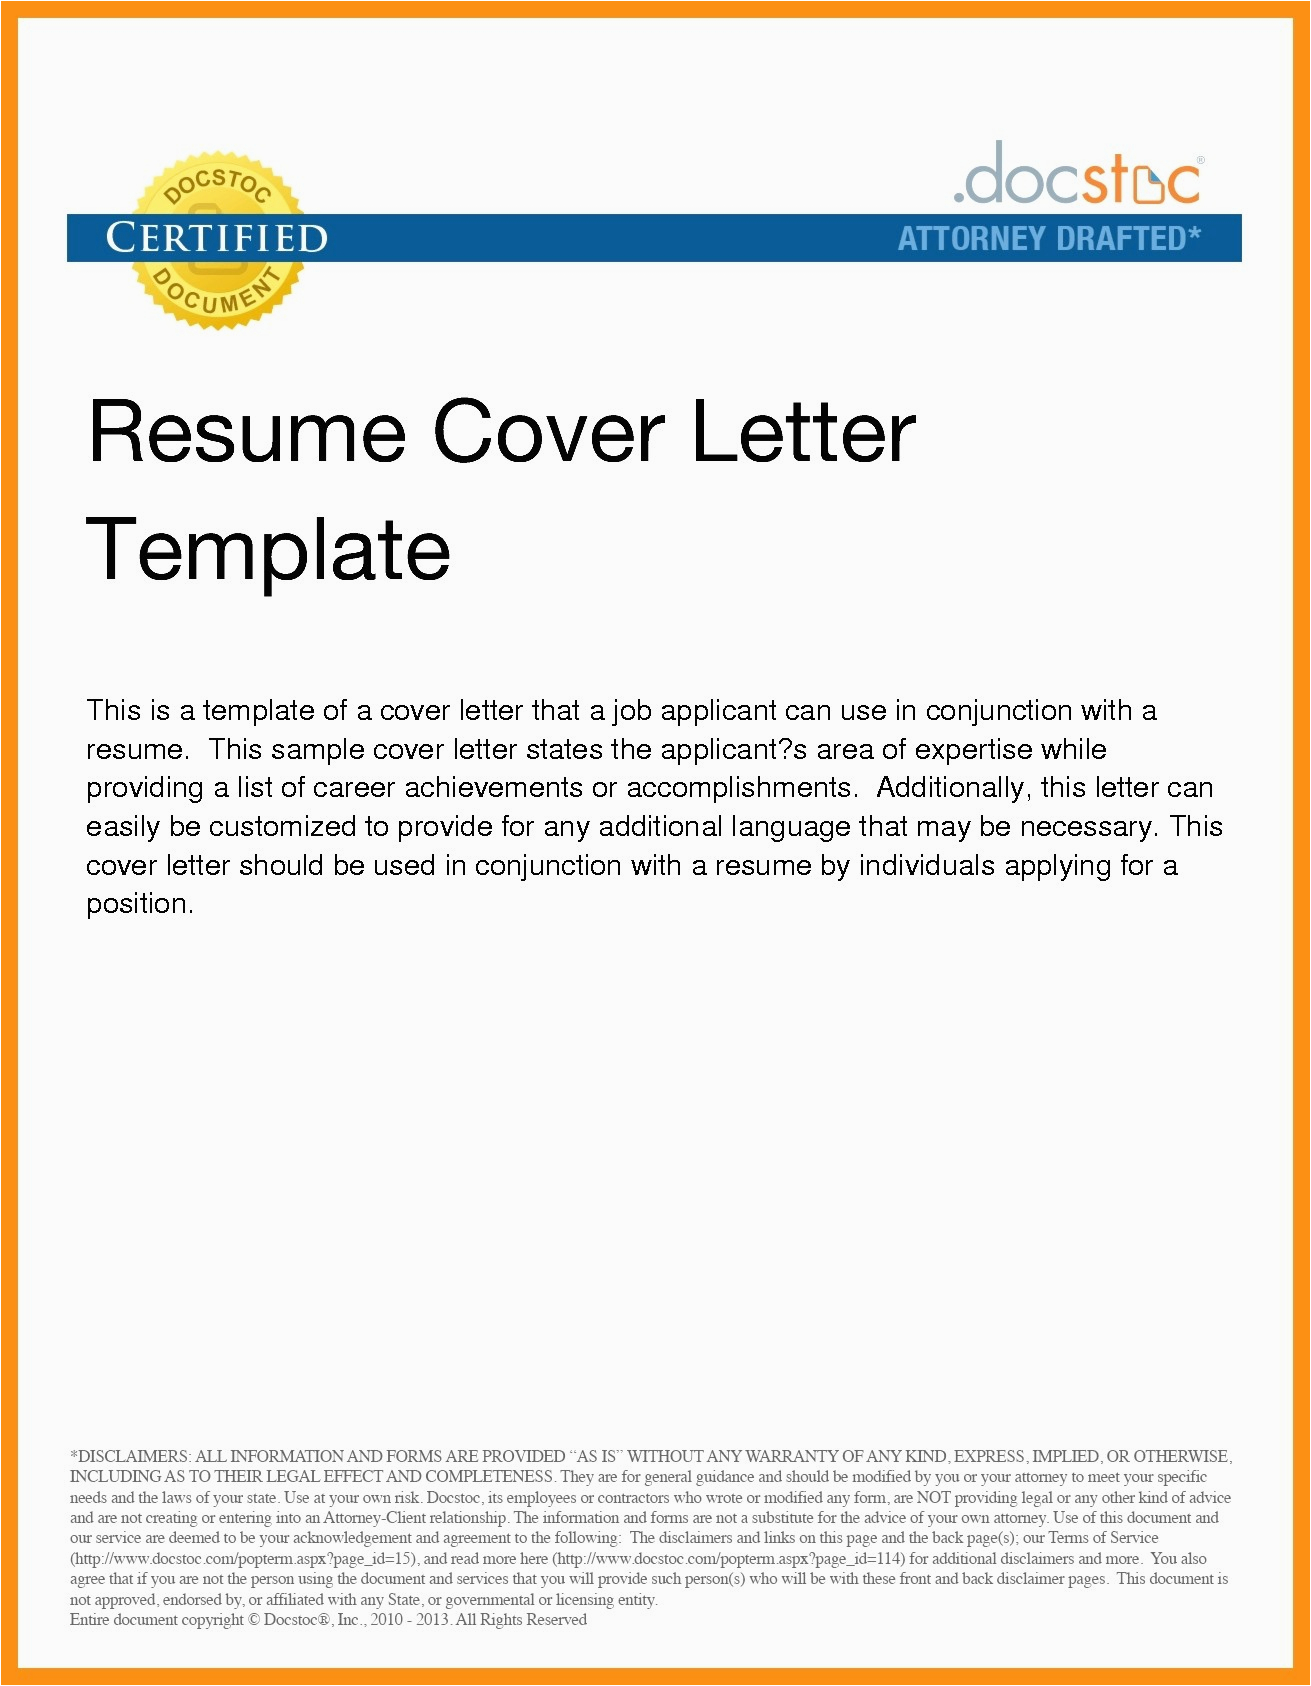 Sample Of Sending Resume by Email Sending Resume and Cover Letter by Email Collection